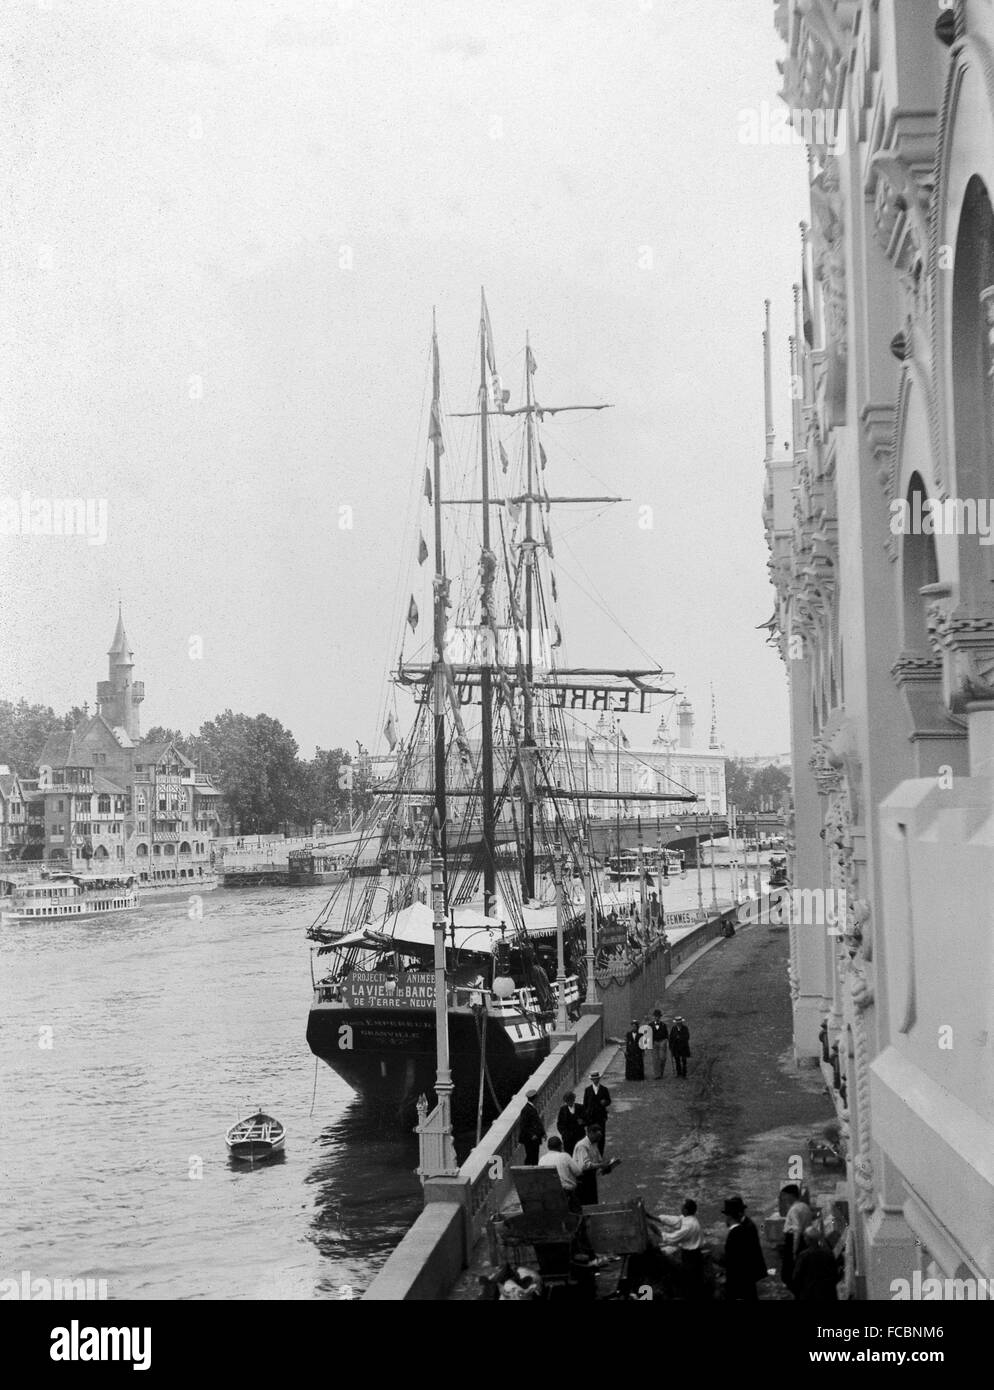 AJAXNETPHOTO. 1900. PARIS, FRANCE. - UNIVERSAL EXPOSITION - WORLD FAIR - THE THREE MASTED SQUARE RIGGED COD FISHING SHIP DEUX EMPEREURS MOORED NEXT TO THE PALACE OF ARMIES ON THE SEINE. IN THE BACKGROUND IS A MODEL OF OLD PARIS BY ARTIST AUBERT ROBIDA.    PHOTO; AJAX VINTAGE PICTURE LIBRARY REF:PAR_EXPO 1900_13. Stock Photo